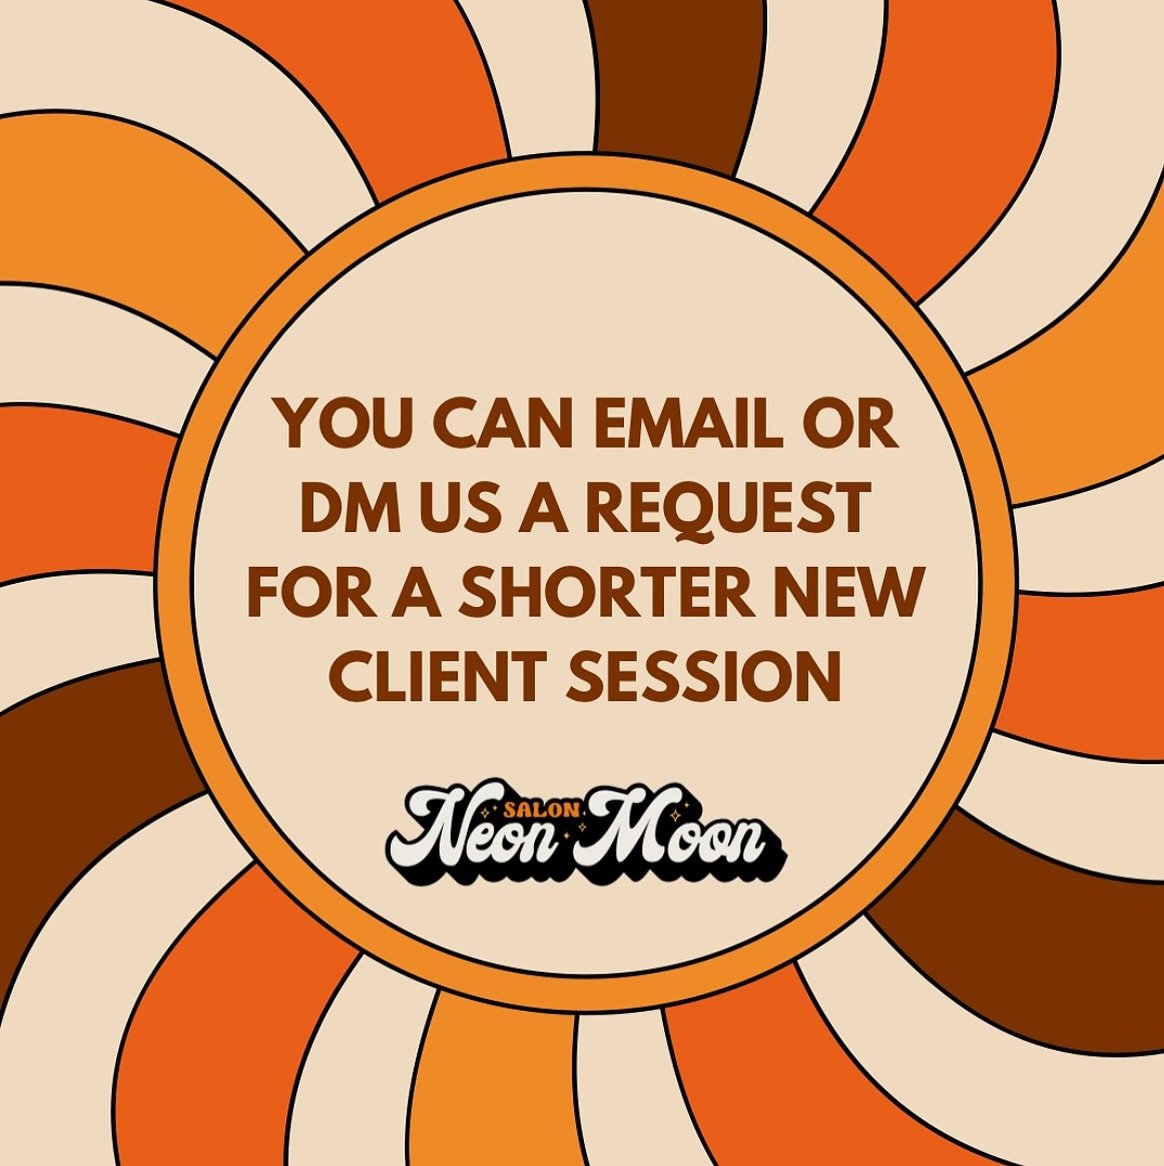 ✂️ We typically require a 2 hour minimum for all new clients that book with us, but occasionally there are folx that don&rsquo;t need that much time! 

Here&rsquo;s who&rsquo;s a good candidate for a shorter new client session at @neonmoonsalon👇👇👇